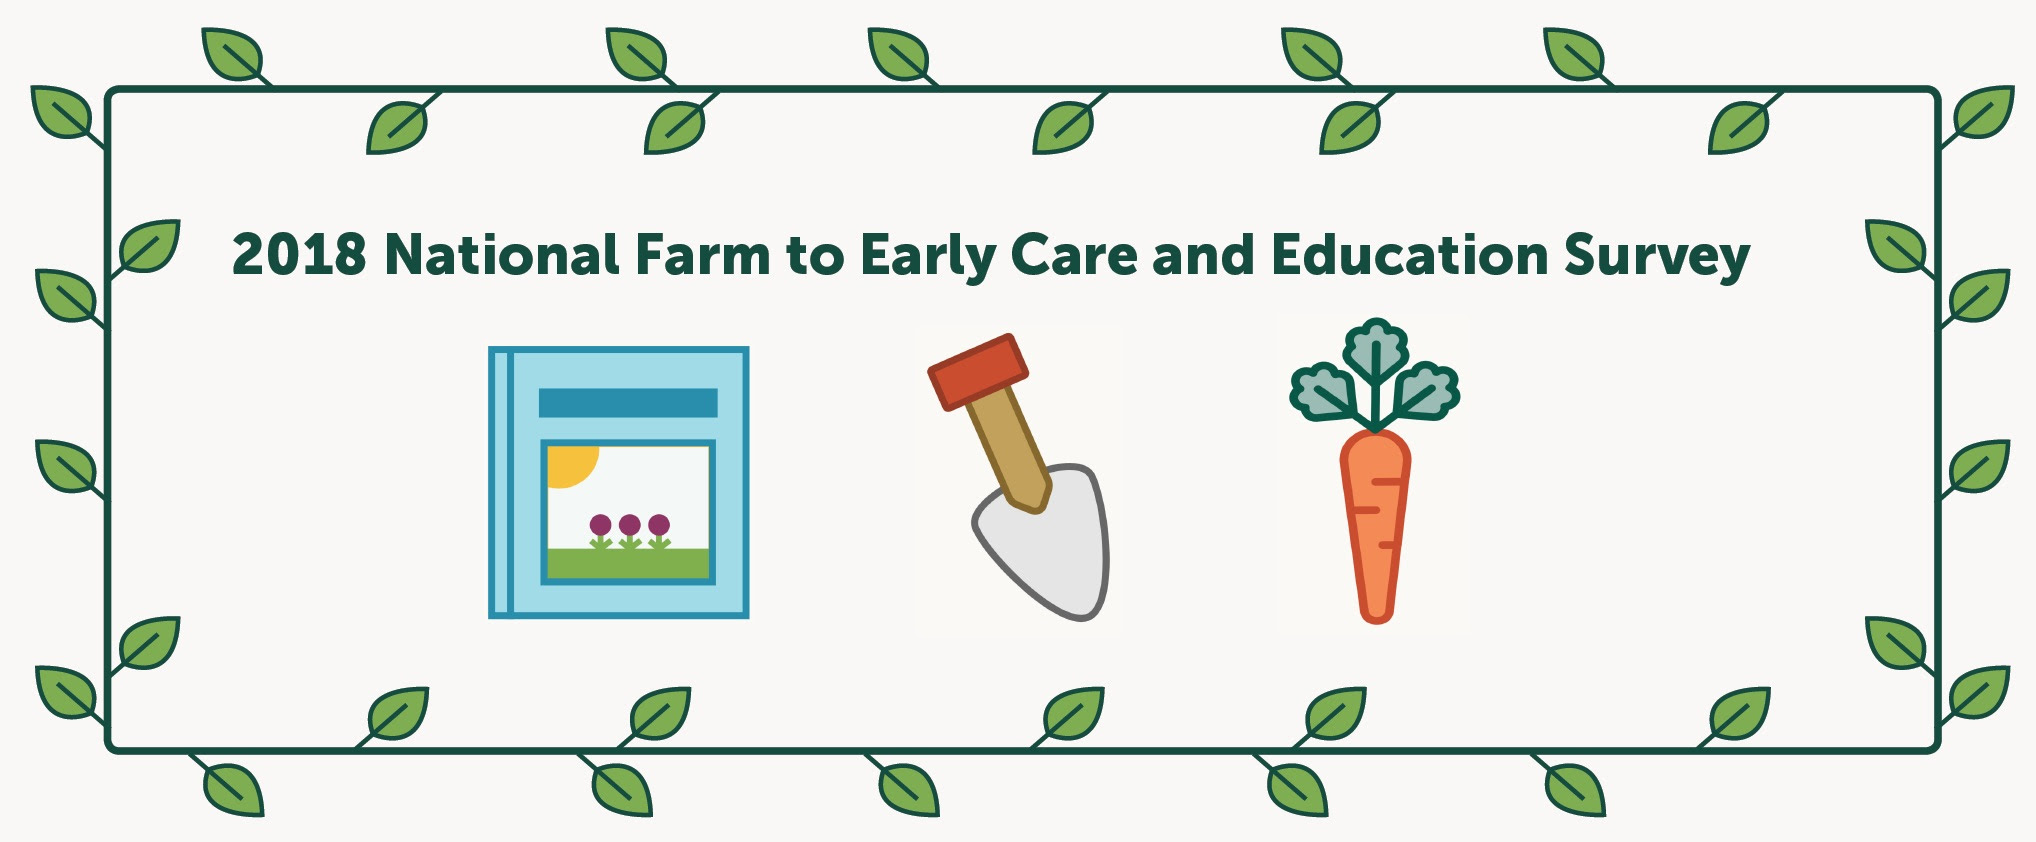 Results from the 2018 National Farm to Early Care and Education Survey